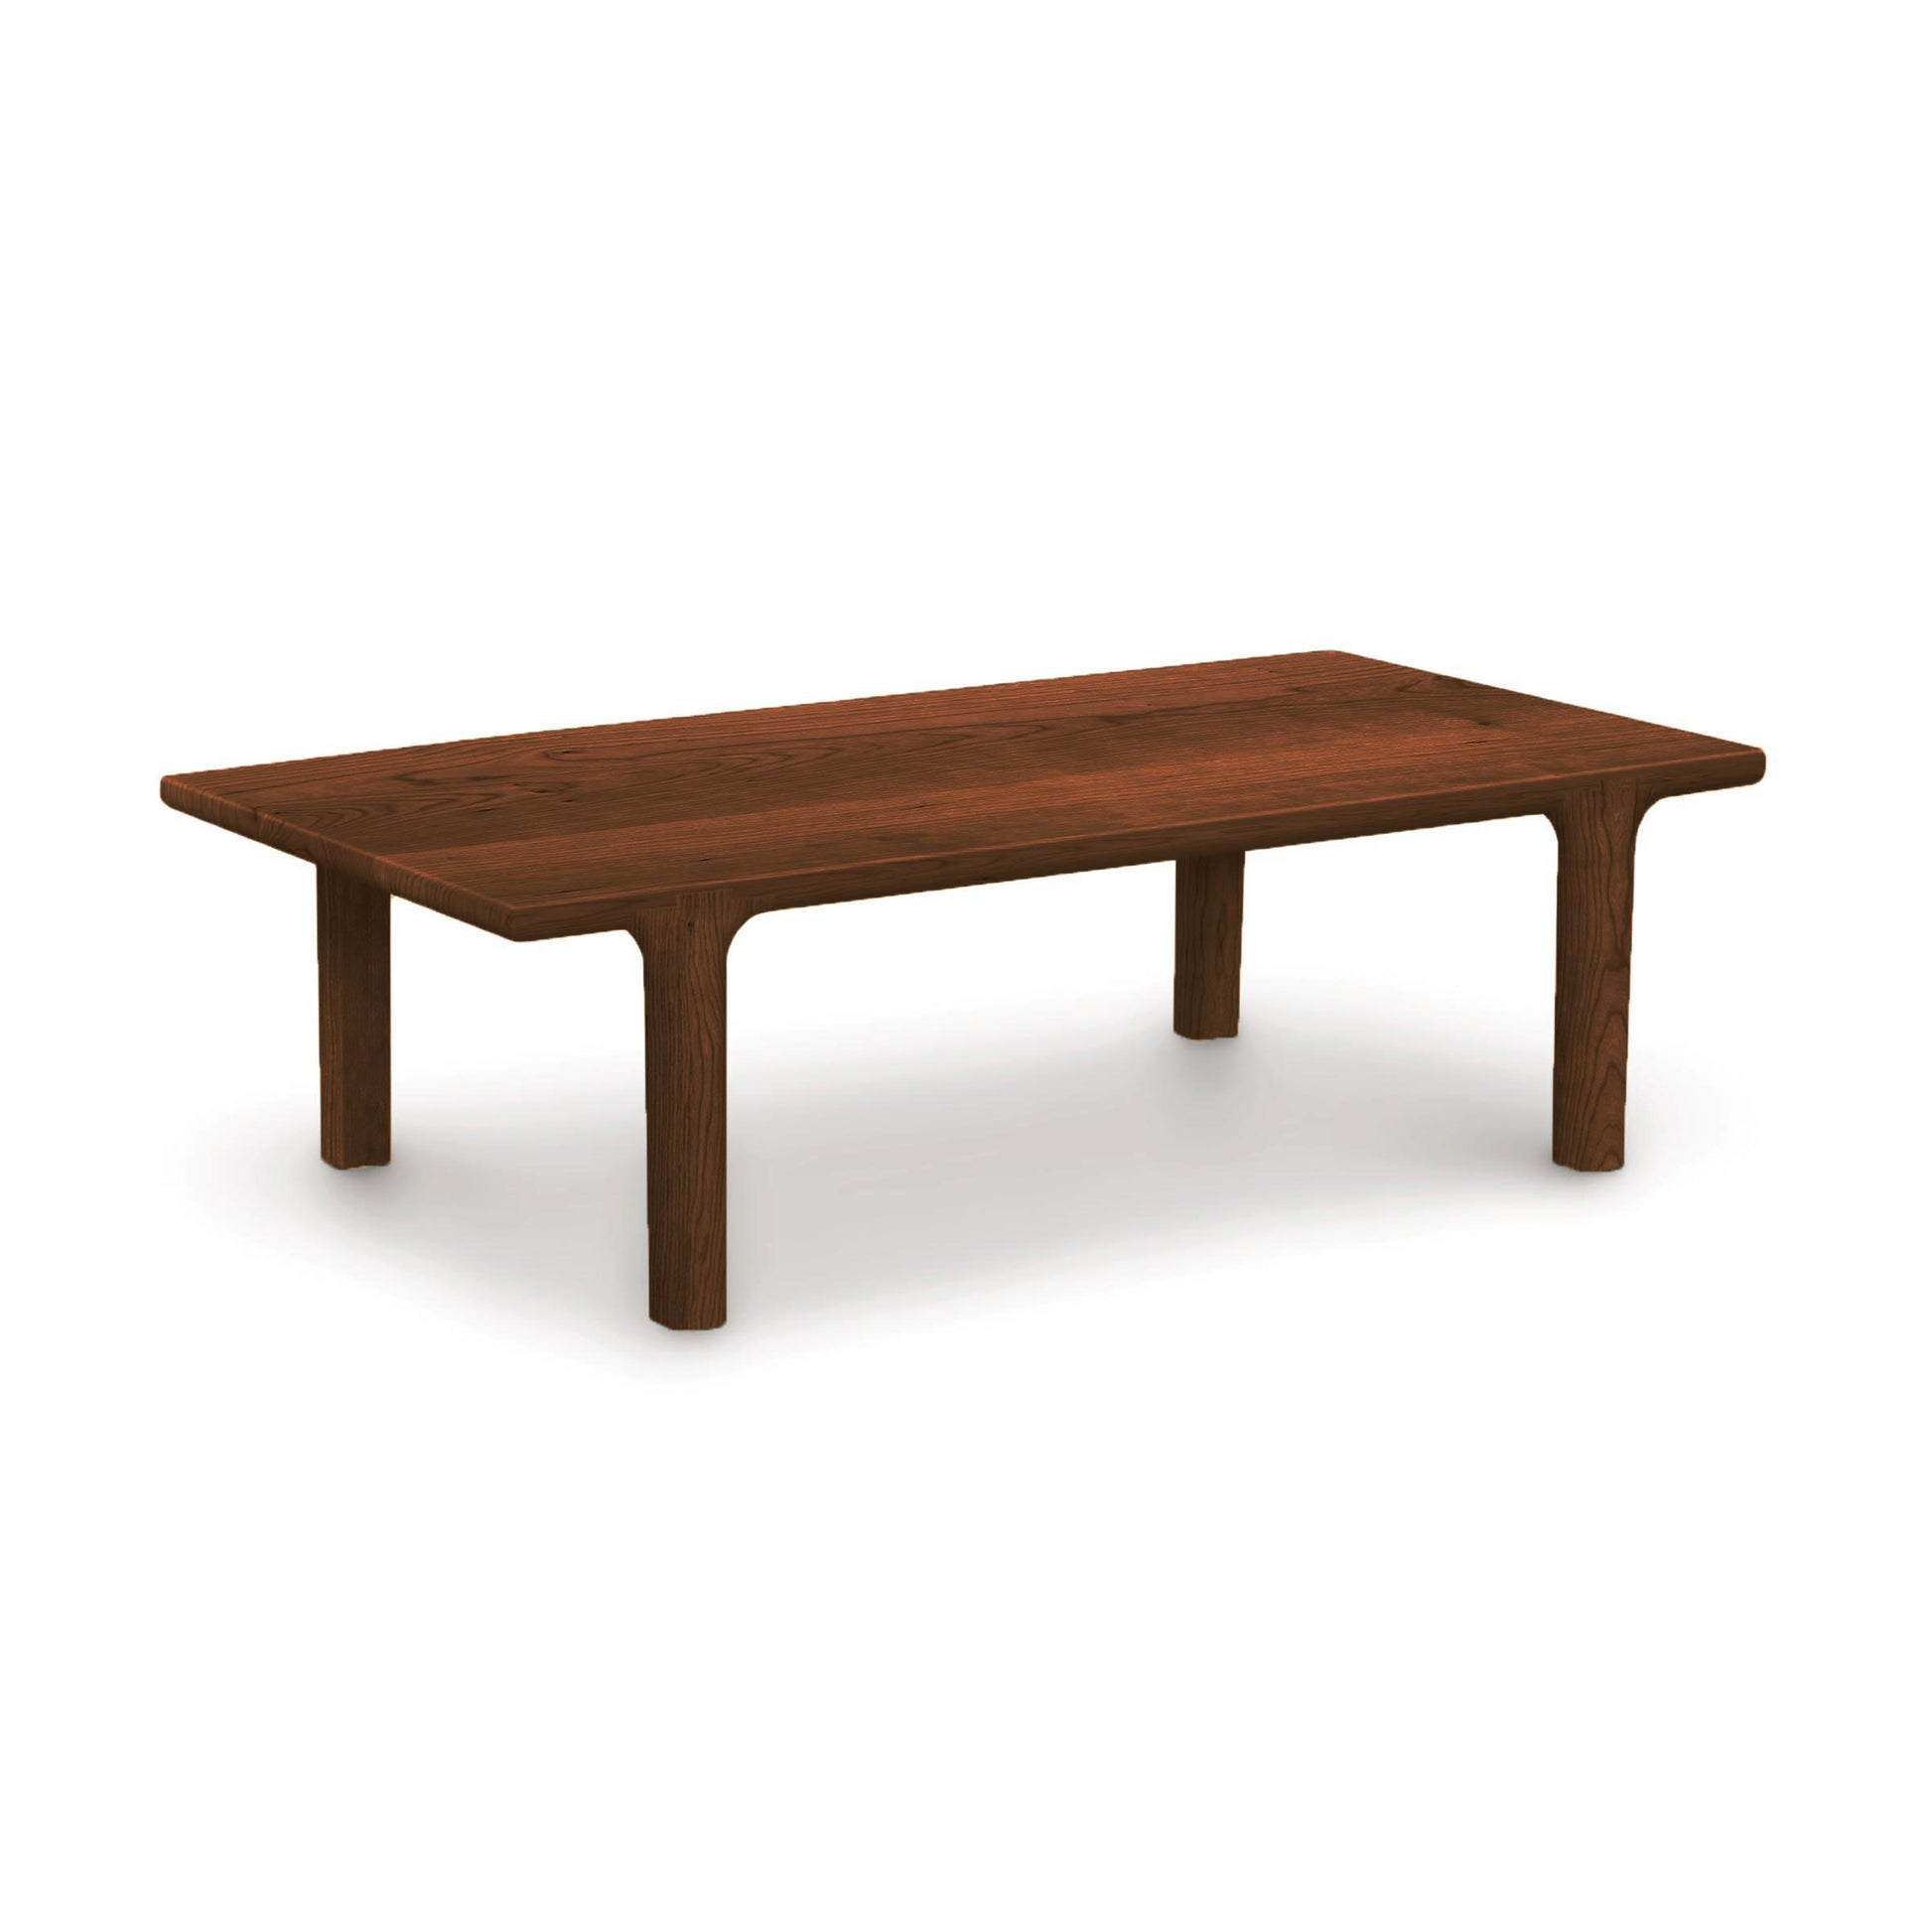 A small wooden Sierra Rectangular Coffee Table by Copeland Furniture on a white background.